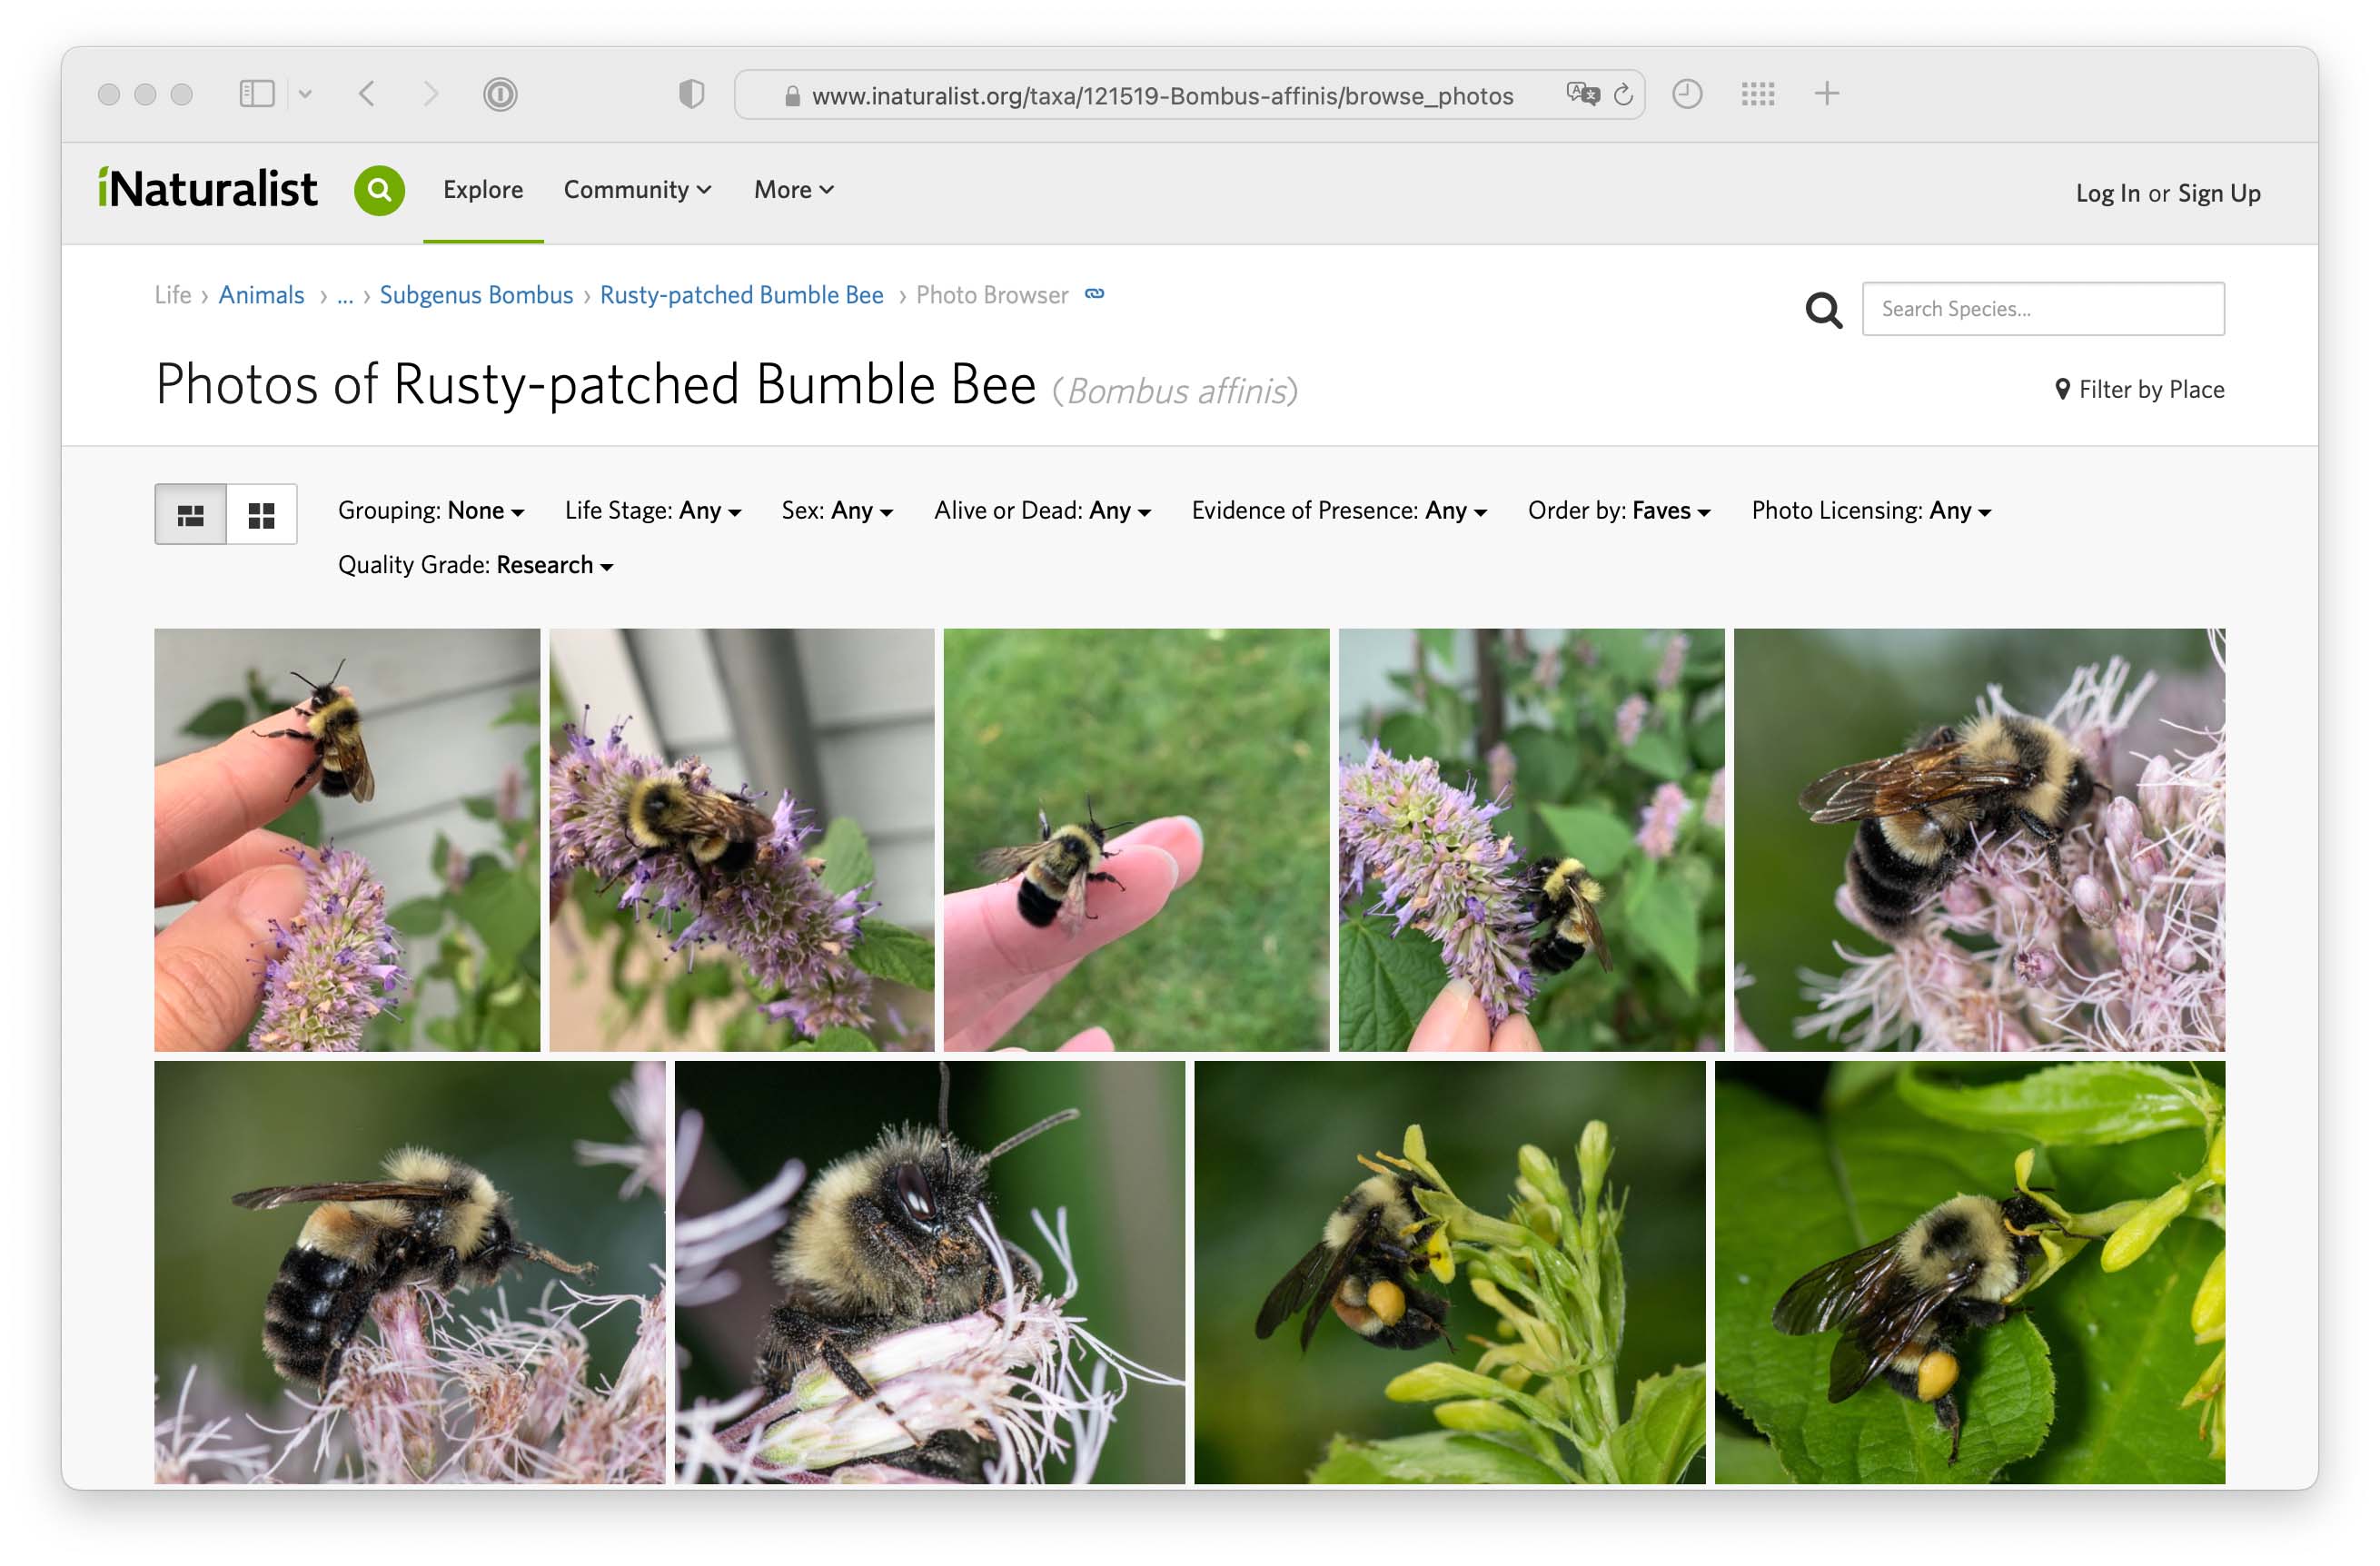 A screenshot of the website iNaturalist with images of the rusty-patched bumblebee